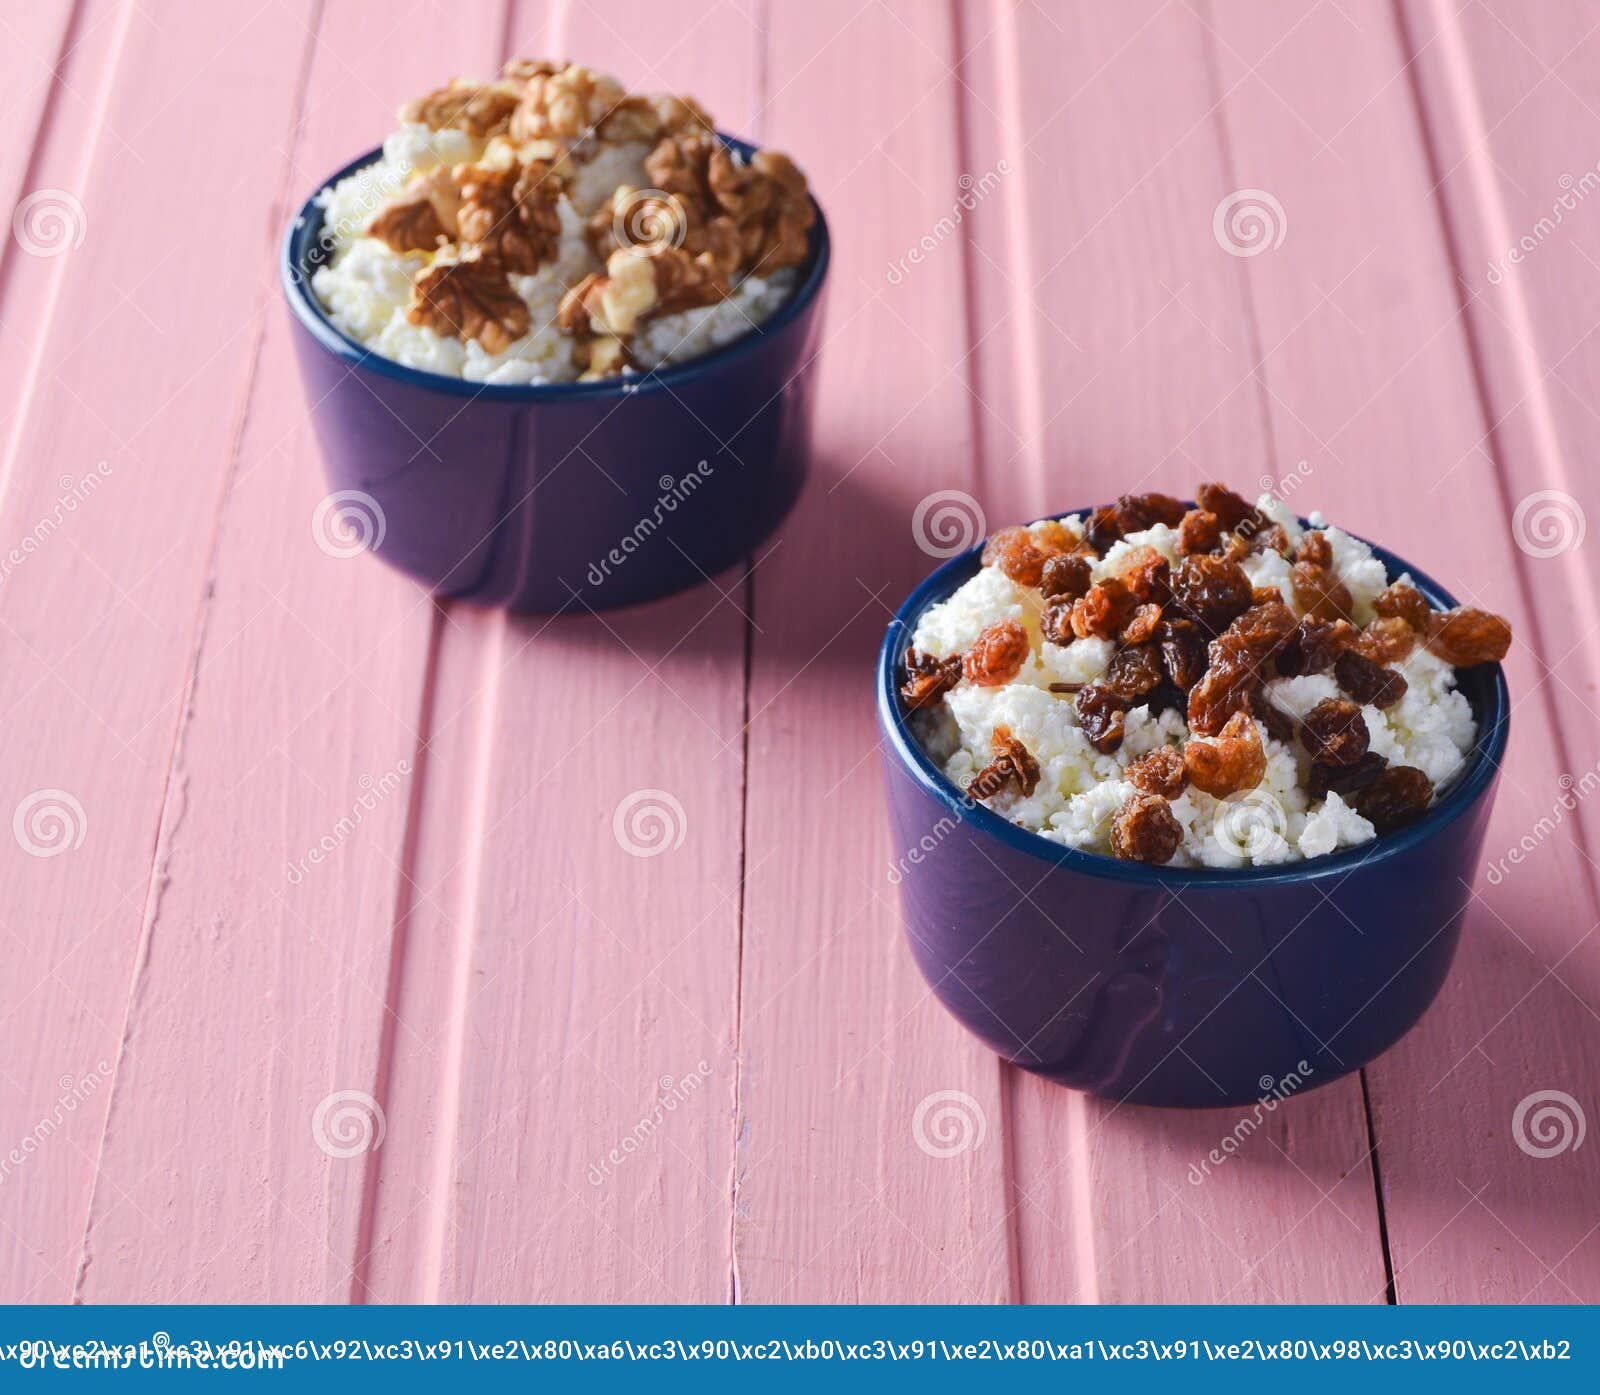 Ceramic Bowls Of Cottage Cheese With Raisins And Walnuts On A Pink